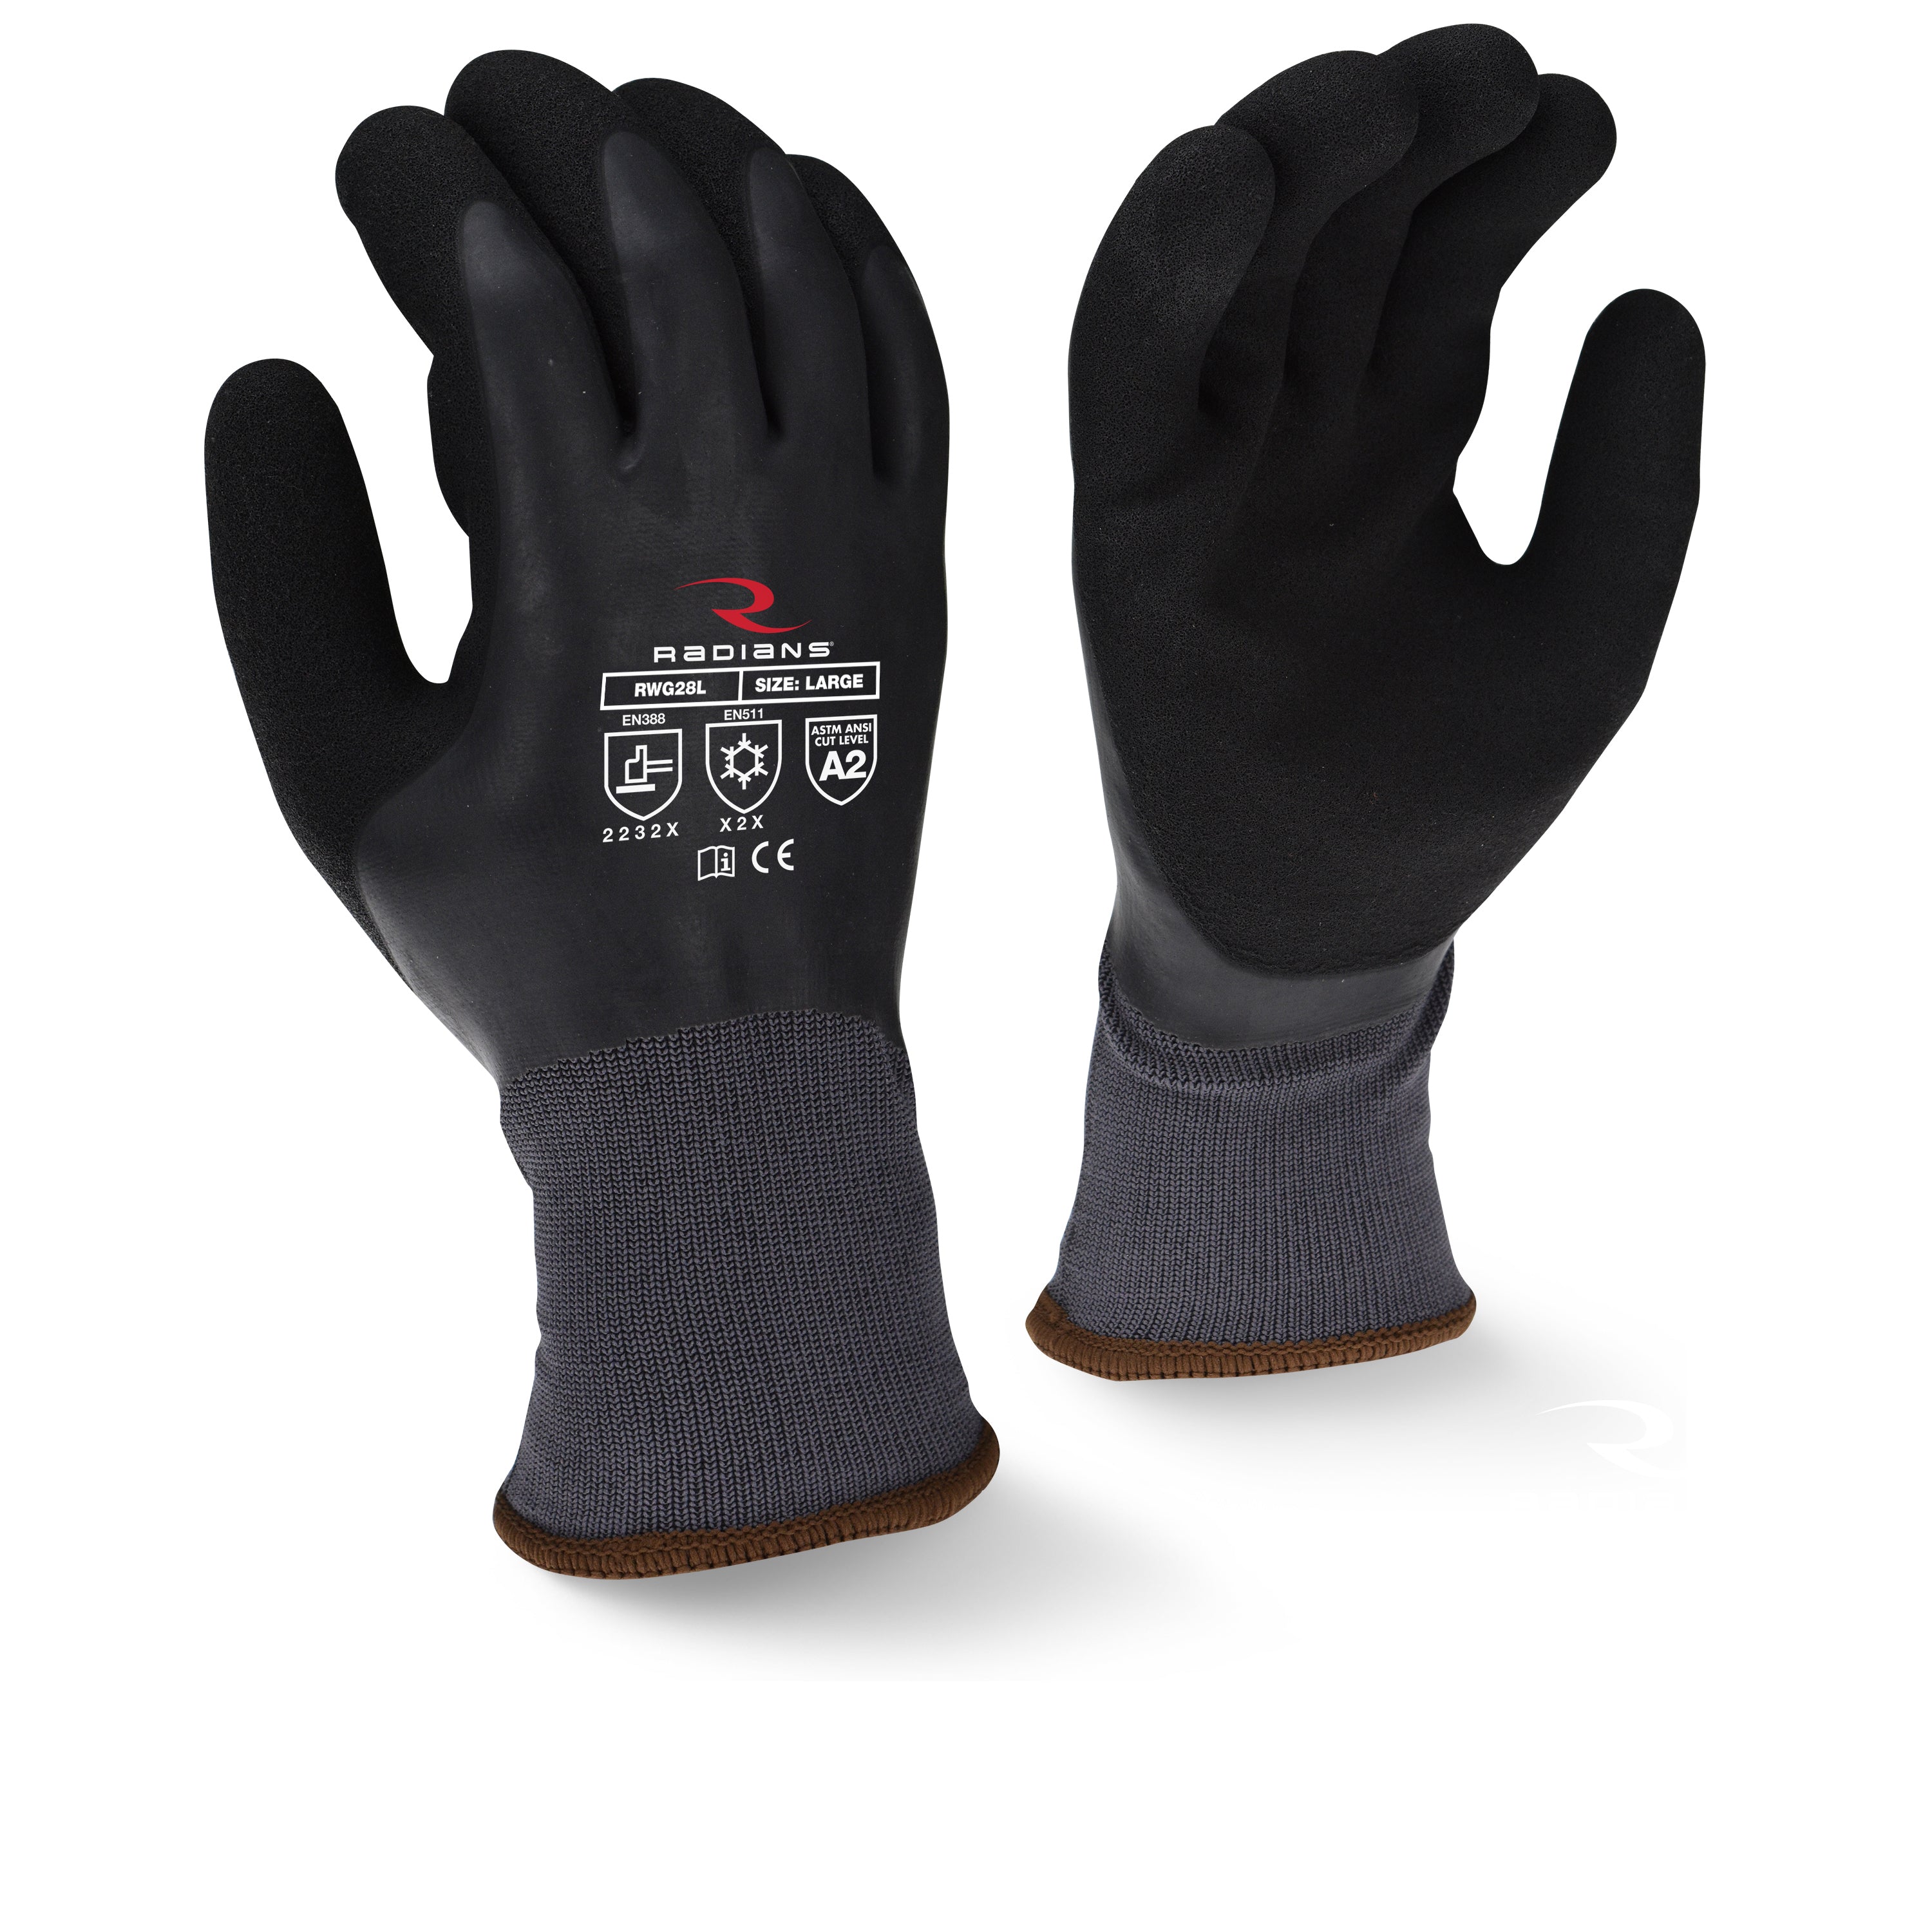 Radians RWG28 Cut Protection Level A2 Dipped Waterproof Winter Gripper Glove-eSafety Supplies, Inc